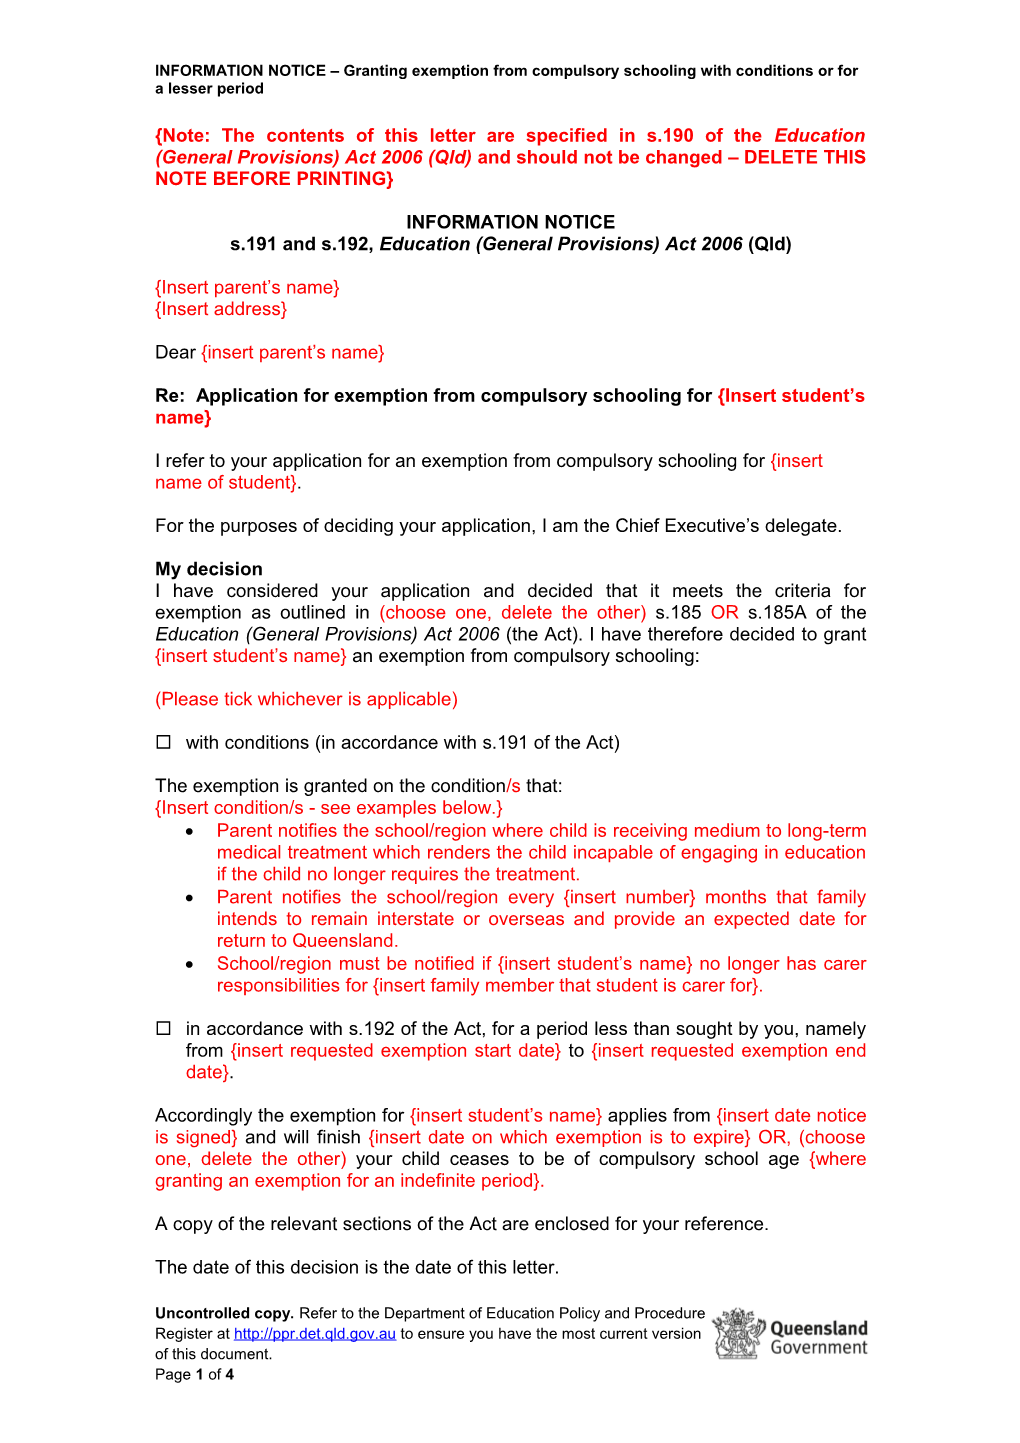 Information Notice - Granting Exemption from Compulsory Schooling with Conditions Or For